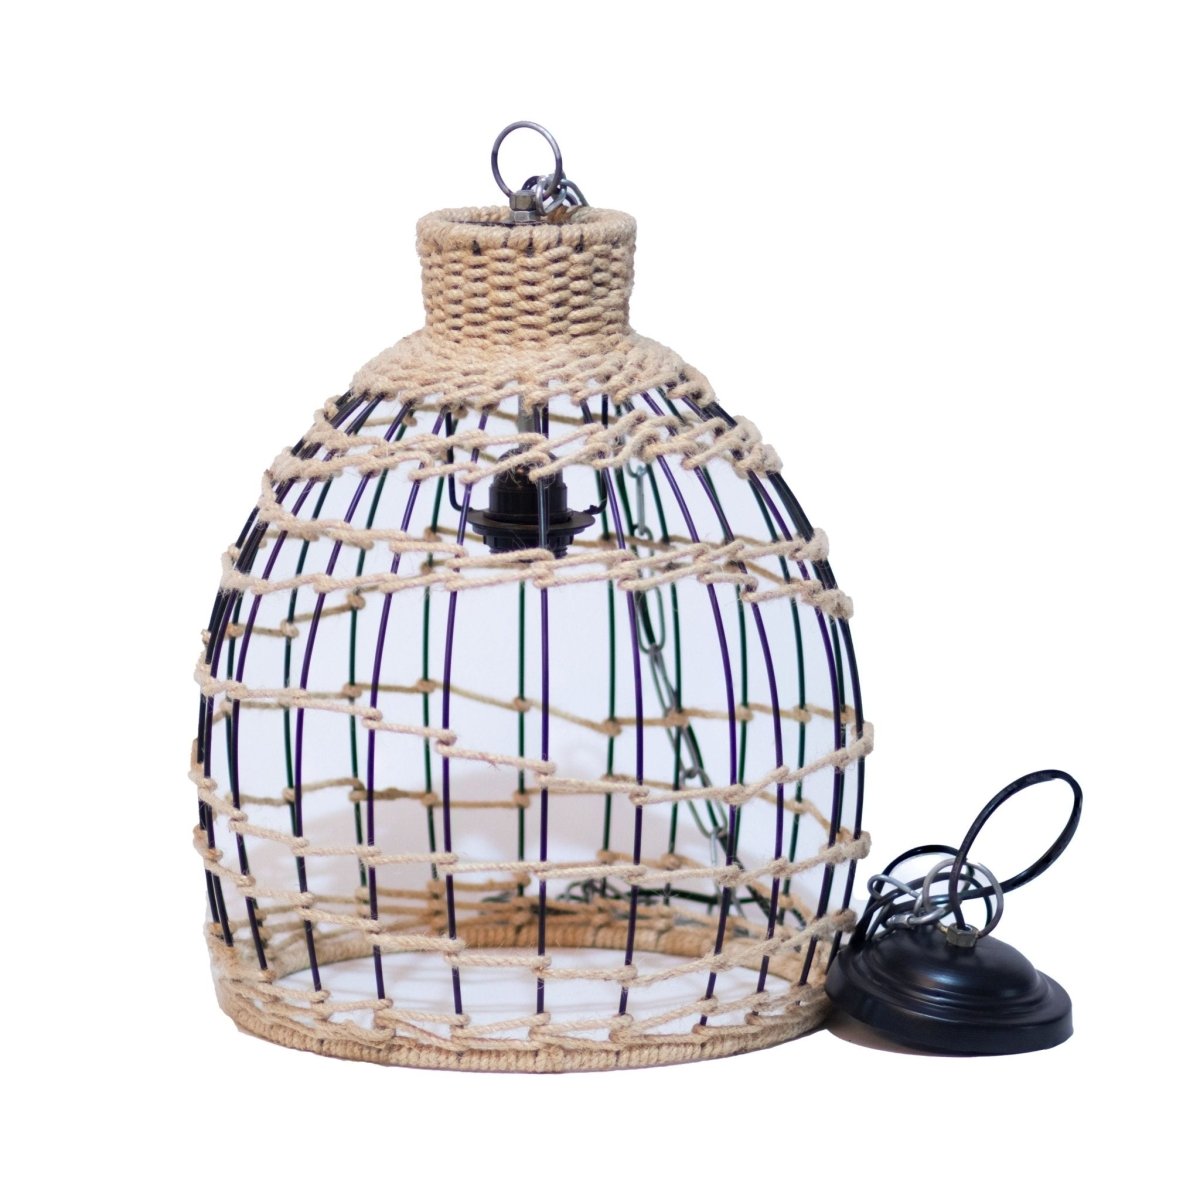 Kezevel Jute Laced Hanging Light - Artistically Handcrafted Pendant Light / Lamp for Living Room, Bedroom, Foyer and Balcony